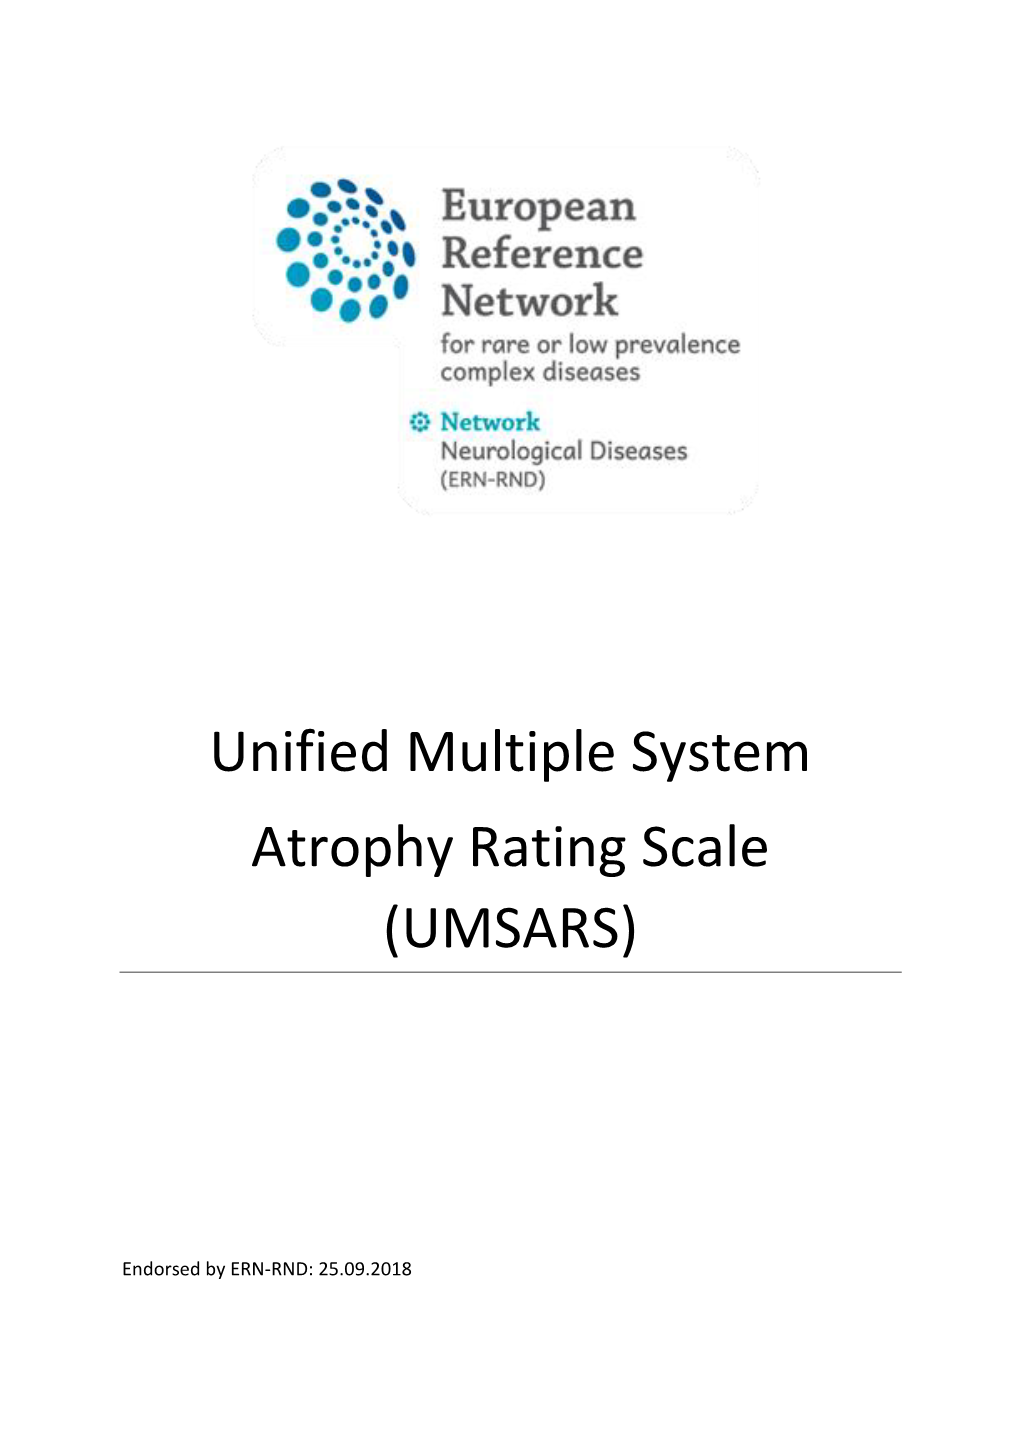 Unified Multiple System Atrophy Rating Scale (UMSARS)